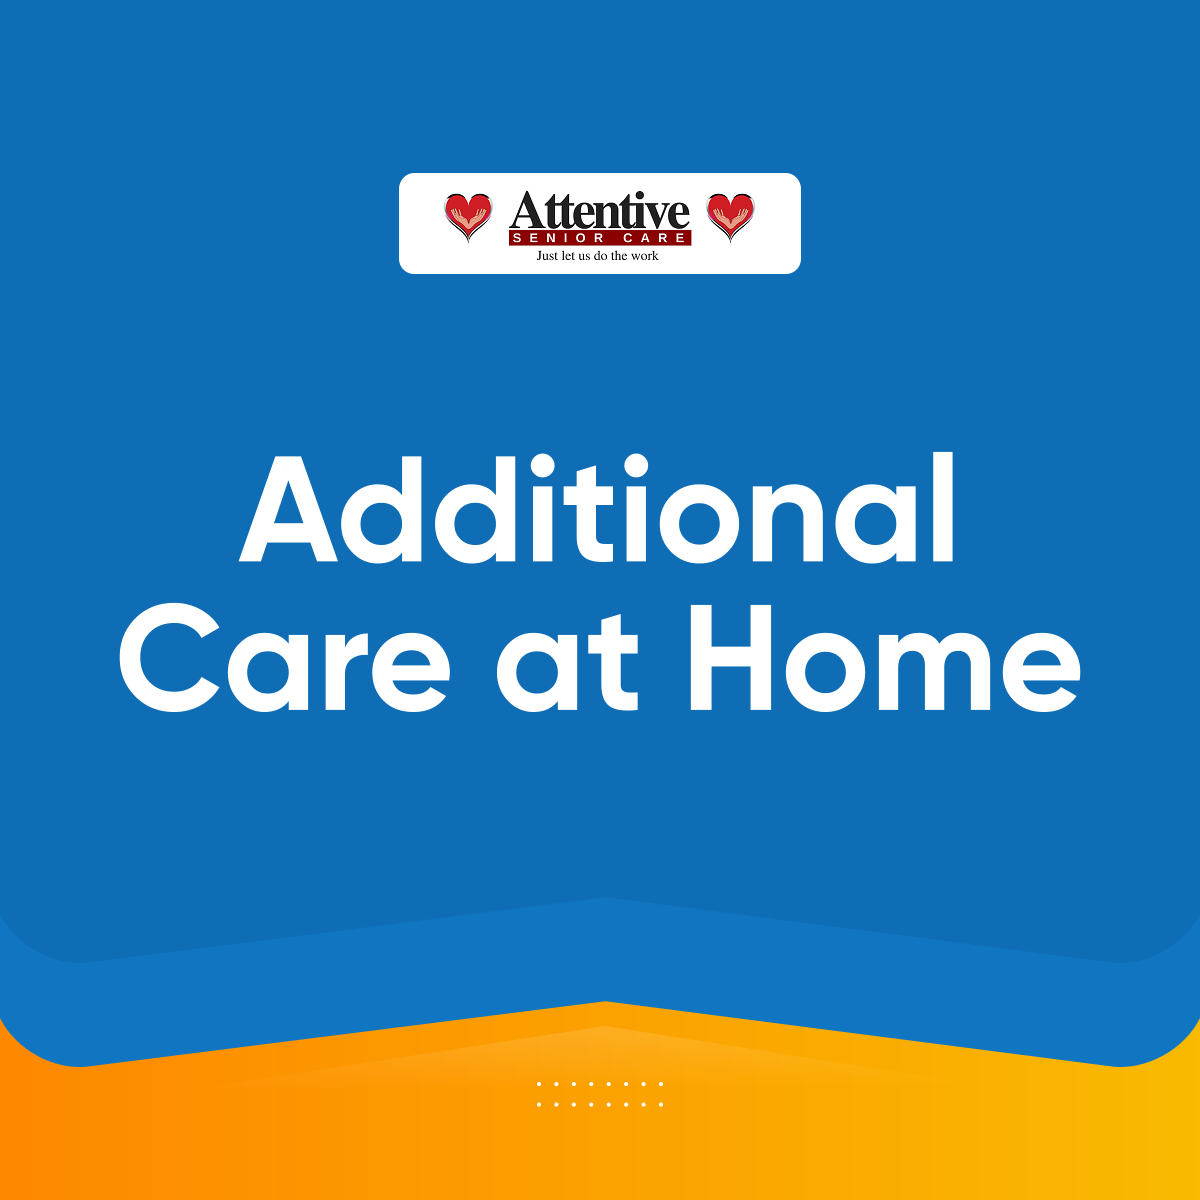 Your senior relatives may require additional assistance and care in their homes. This is especially true if they are facing challenges in aging! We have professionals ready, willing, and able to provide treatment and support in this situation! #AttentiveSeniorCare #SeniorCare